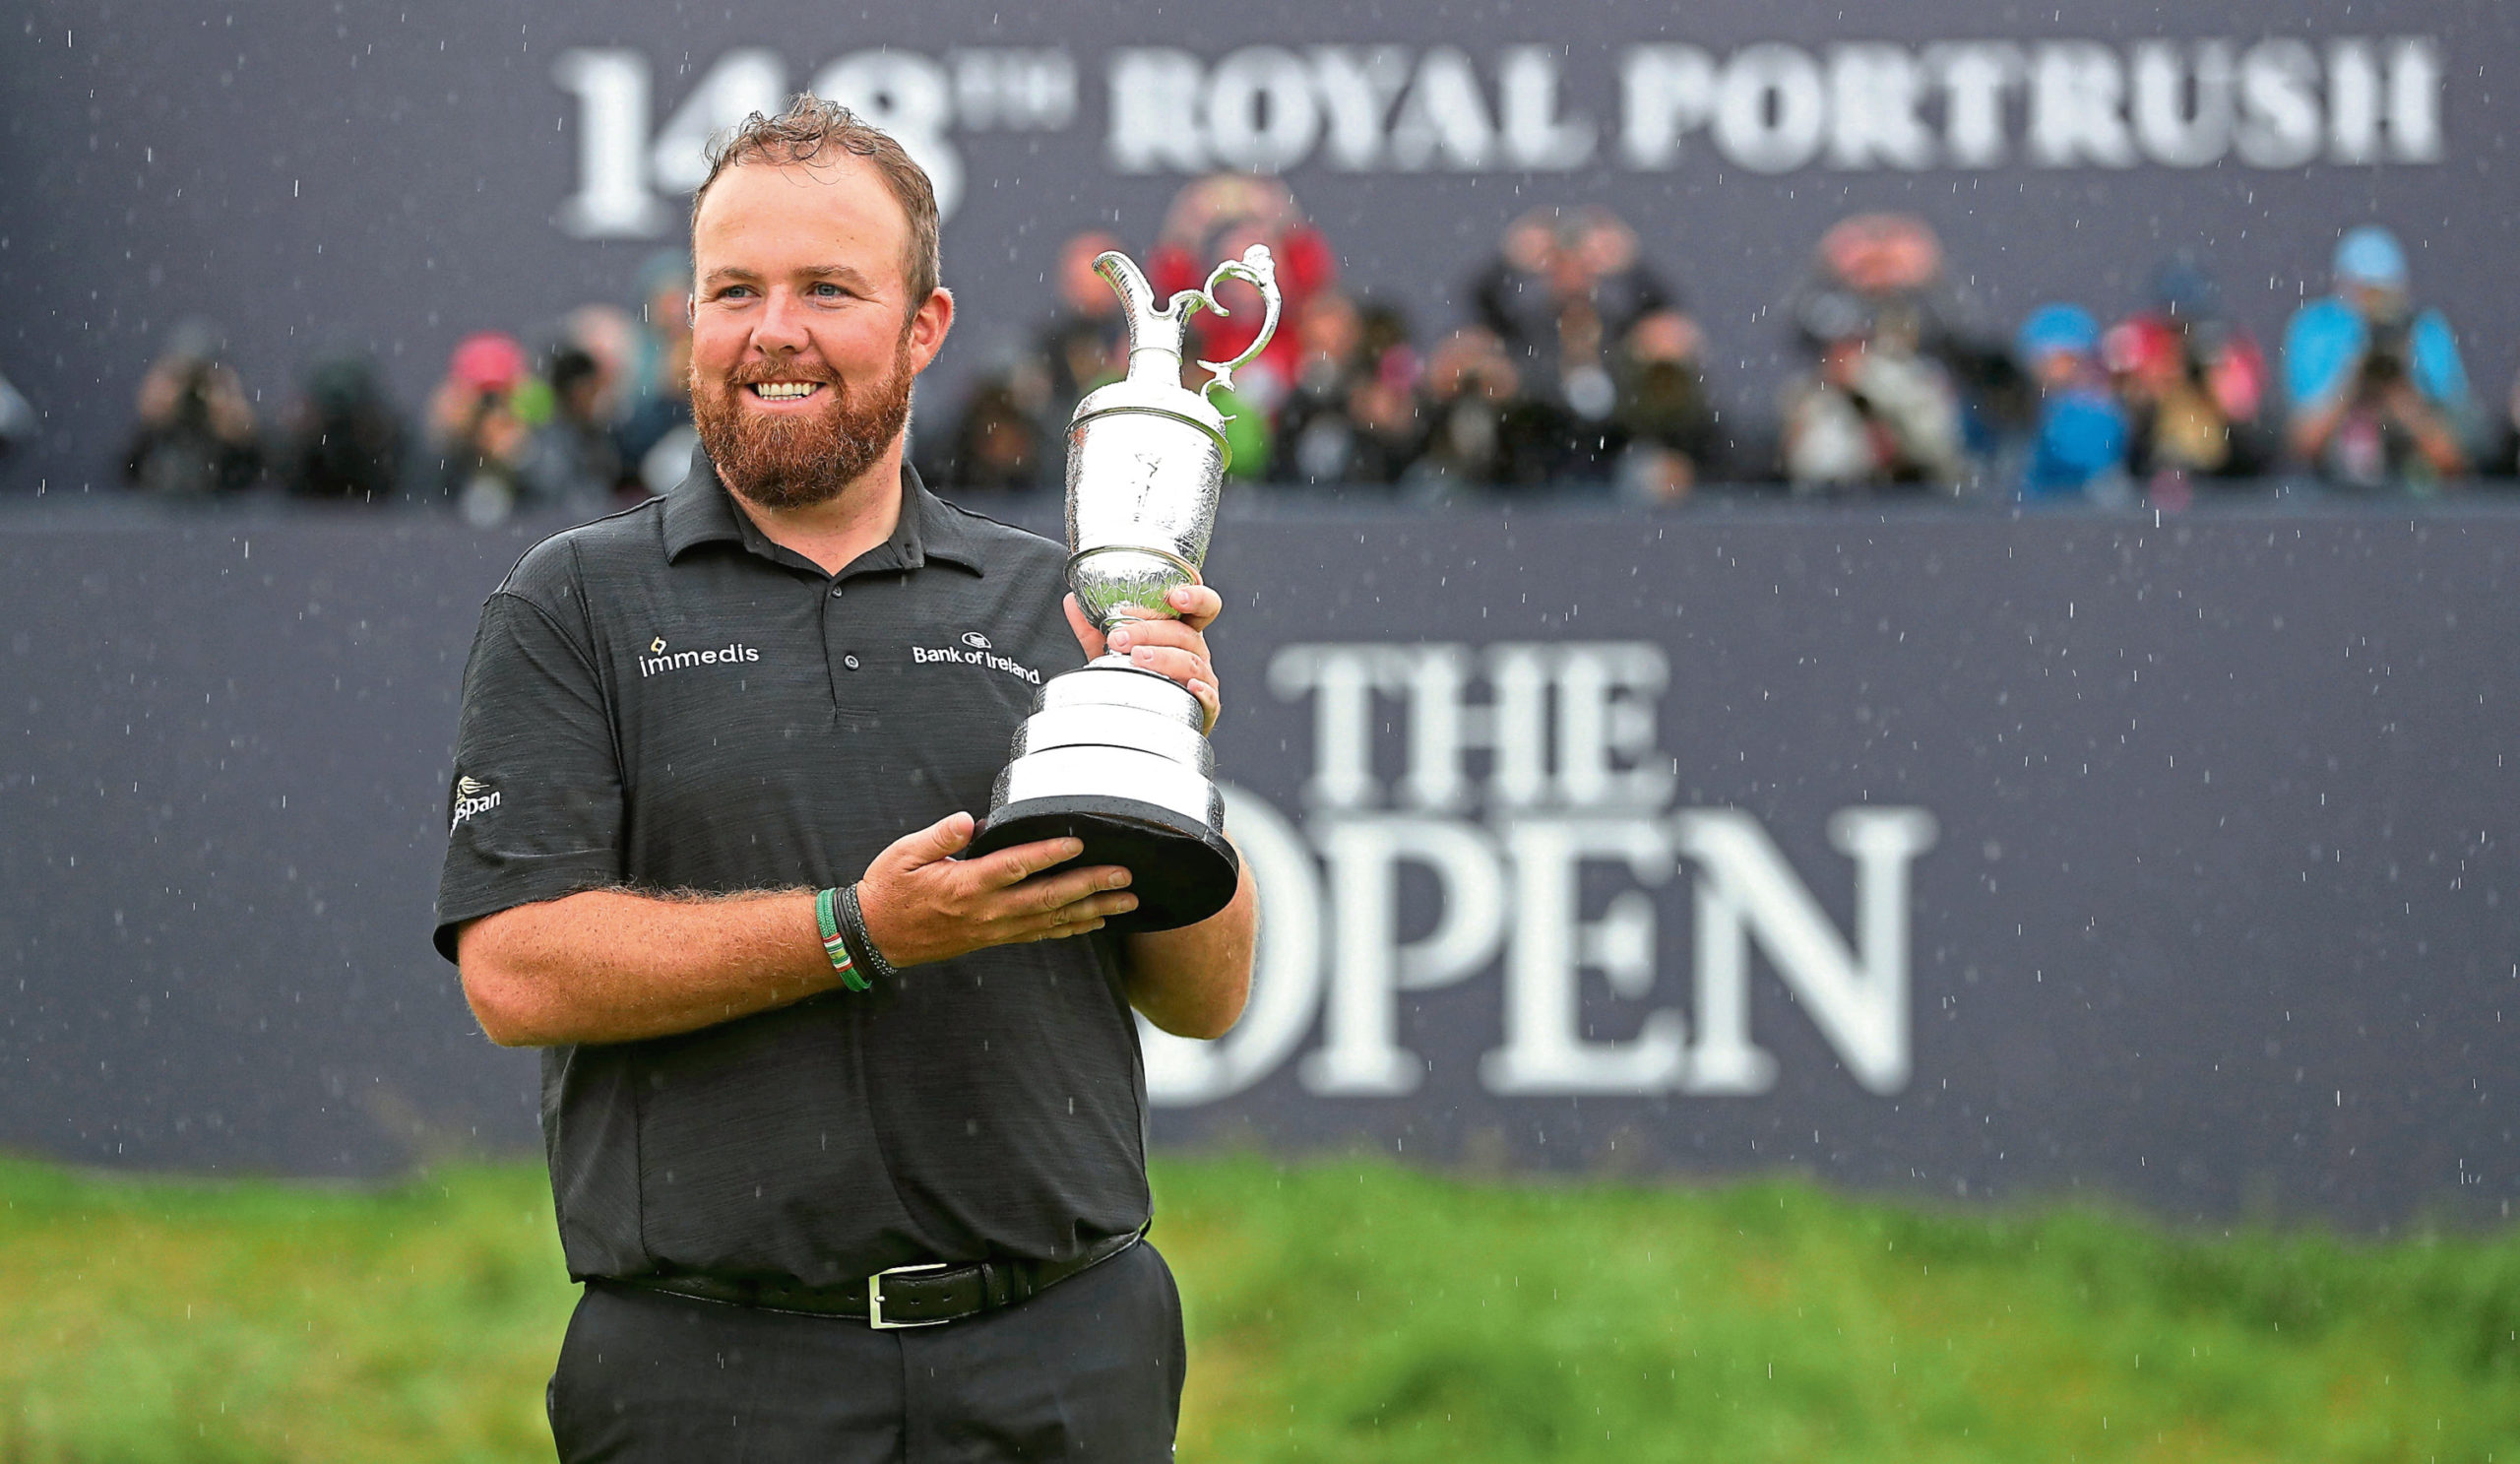 Republic Of Ireland's Shane Lowry celebrates with the Claret Jug after winning The Open Championship 2019 at Royal Portrush Golf Club.